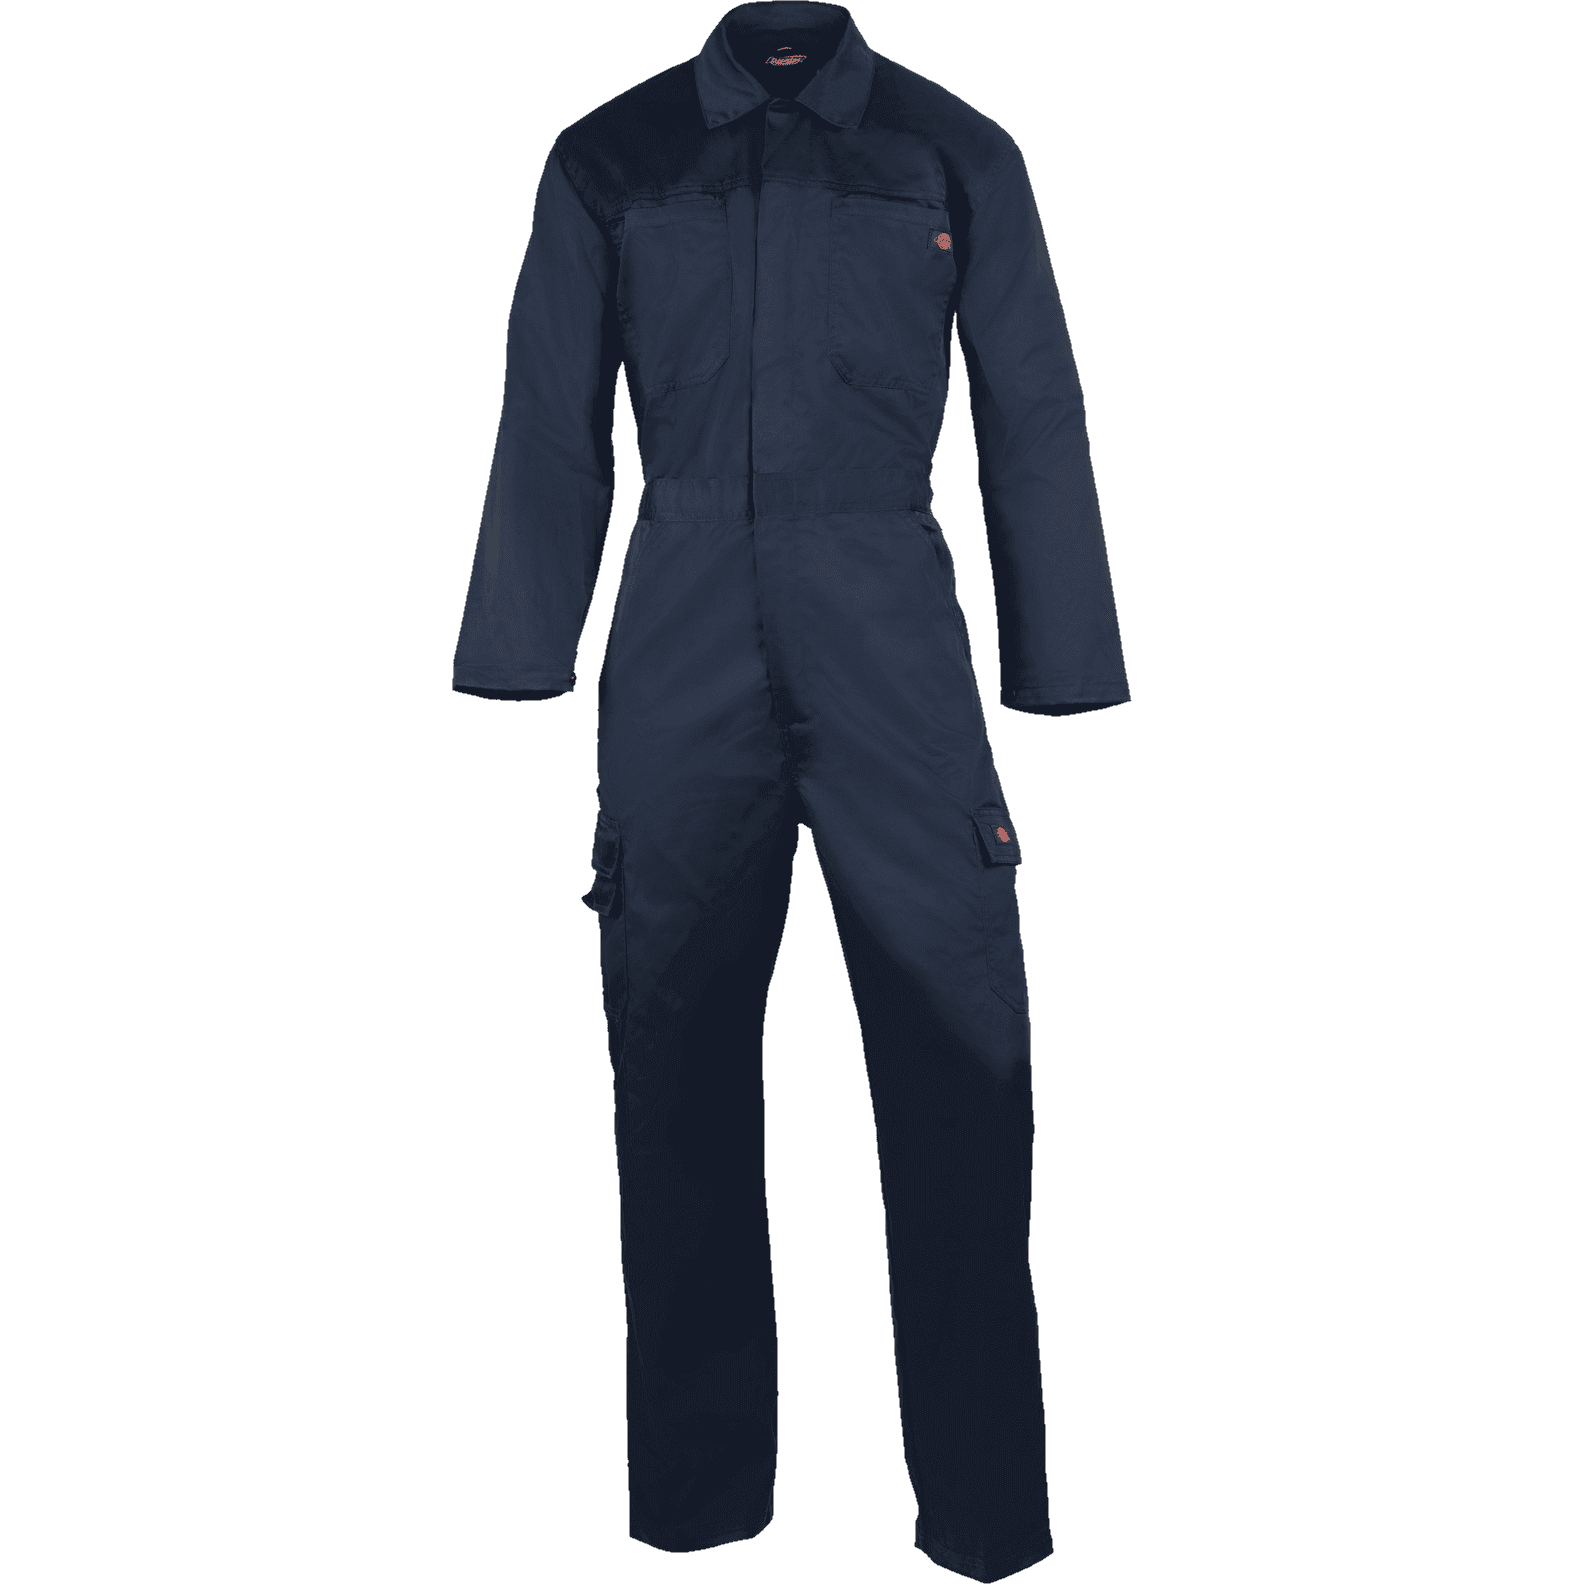 Men's Everyday Coverall Dickies